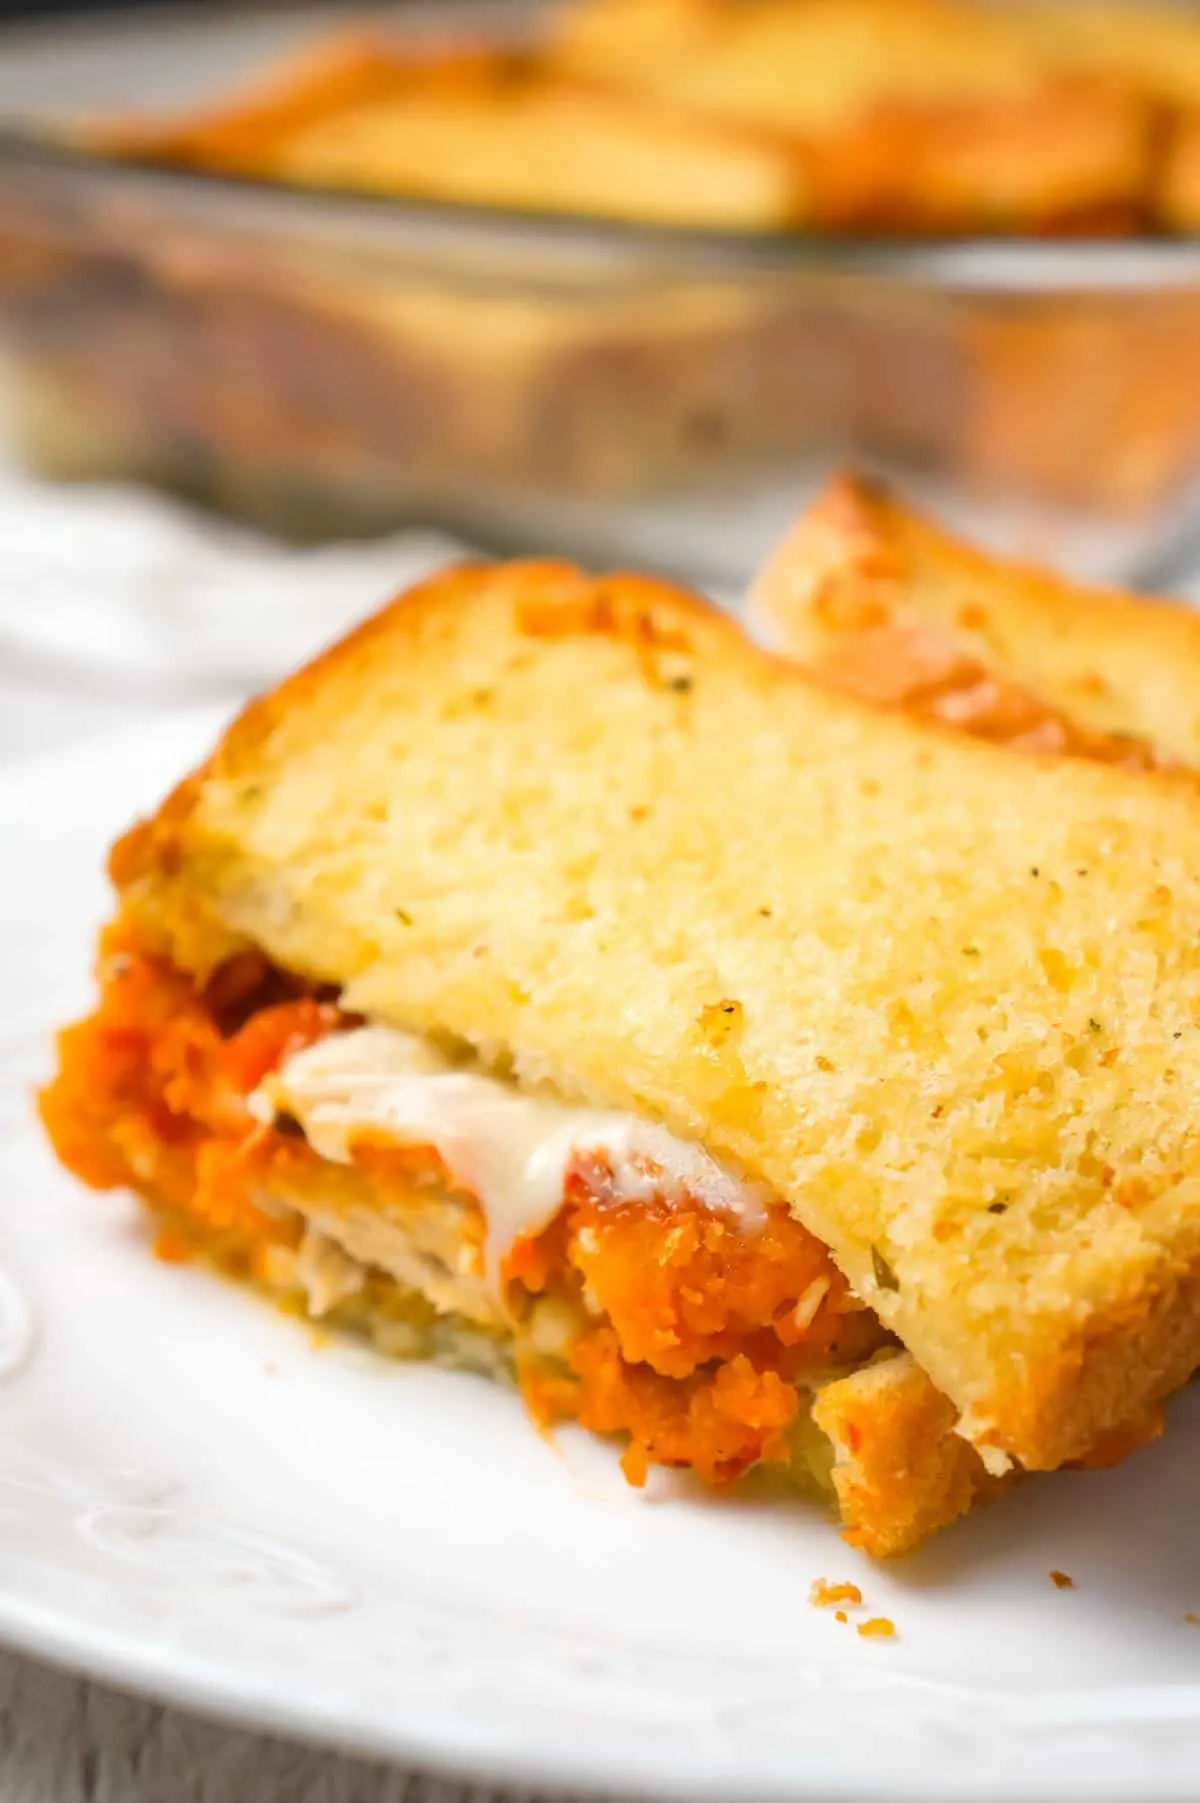 Chicken Parmesan Grilled Cheese Casserole is an easy dinner recipe with popcorn chicken, marinara sauce, mozzarella and Parmesan sandwiched between layers of garlic toast.